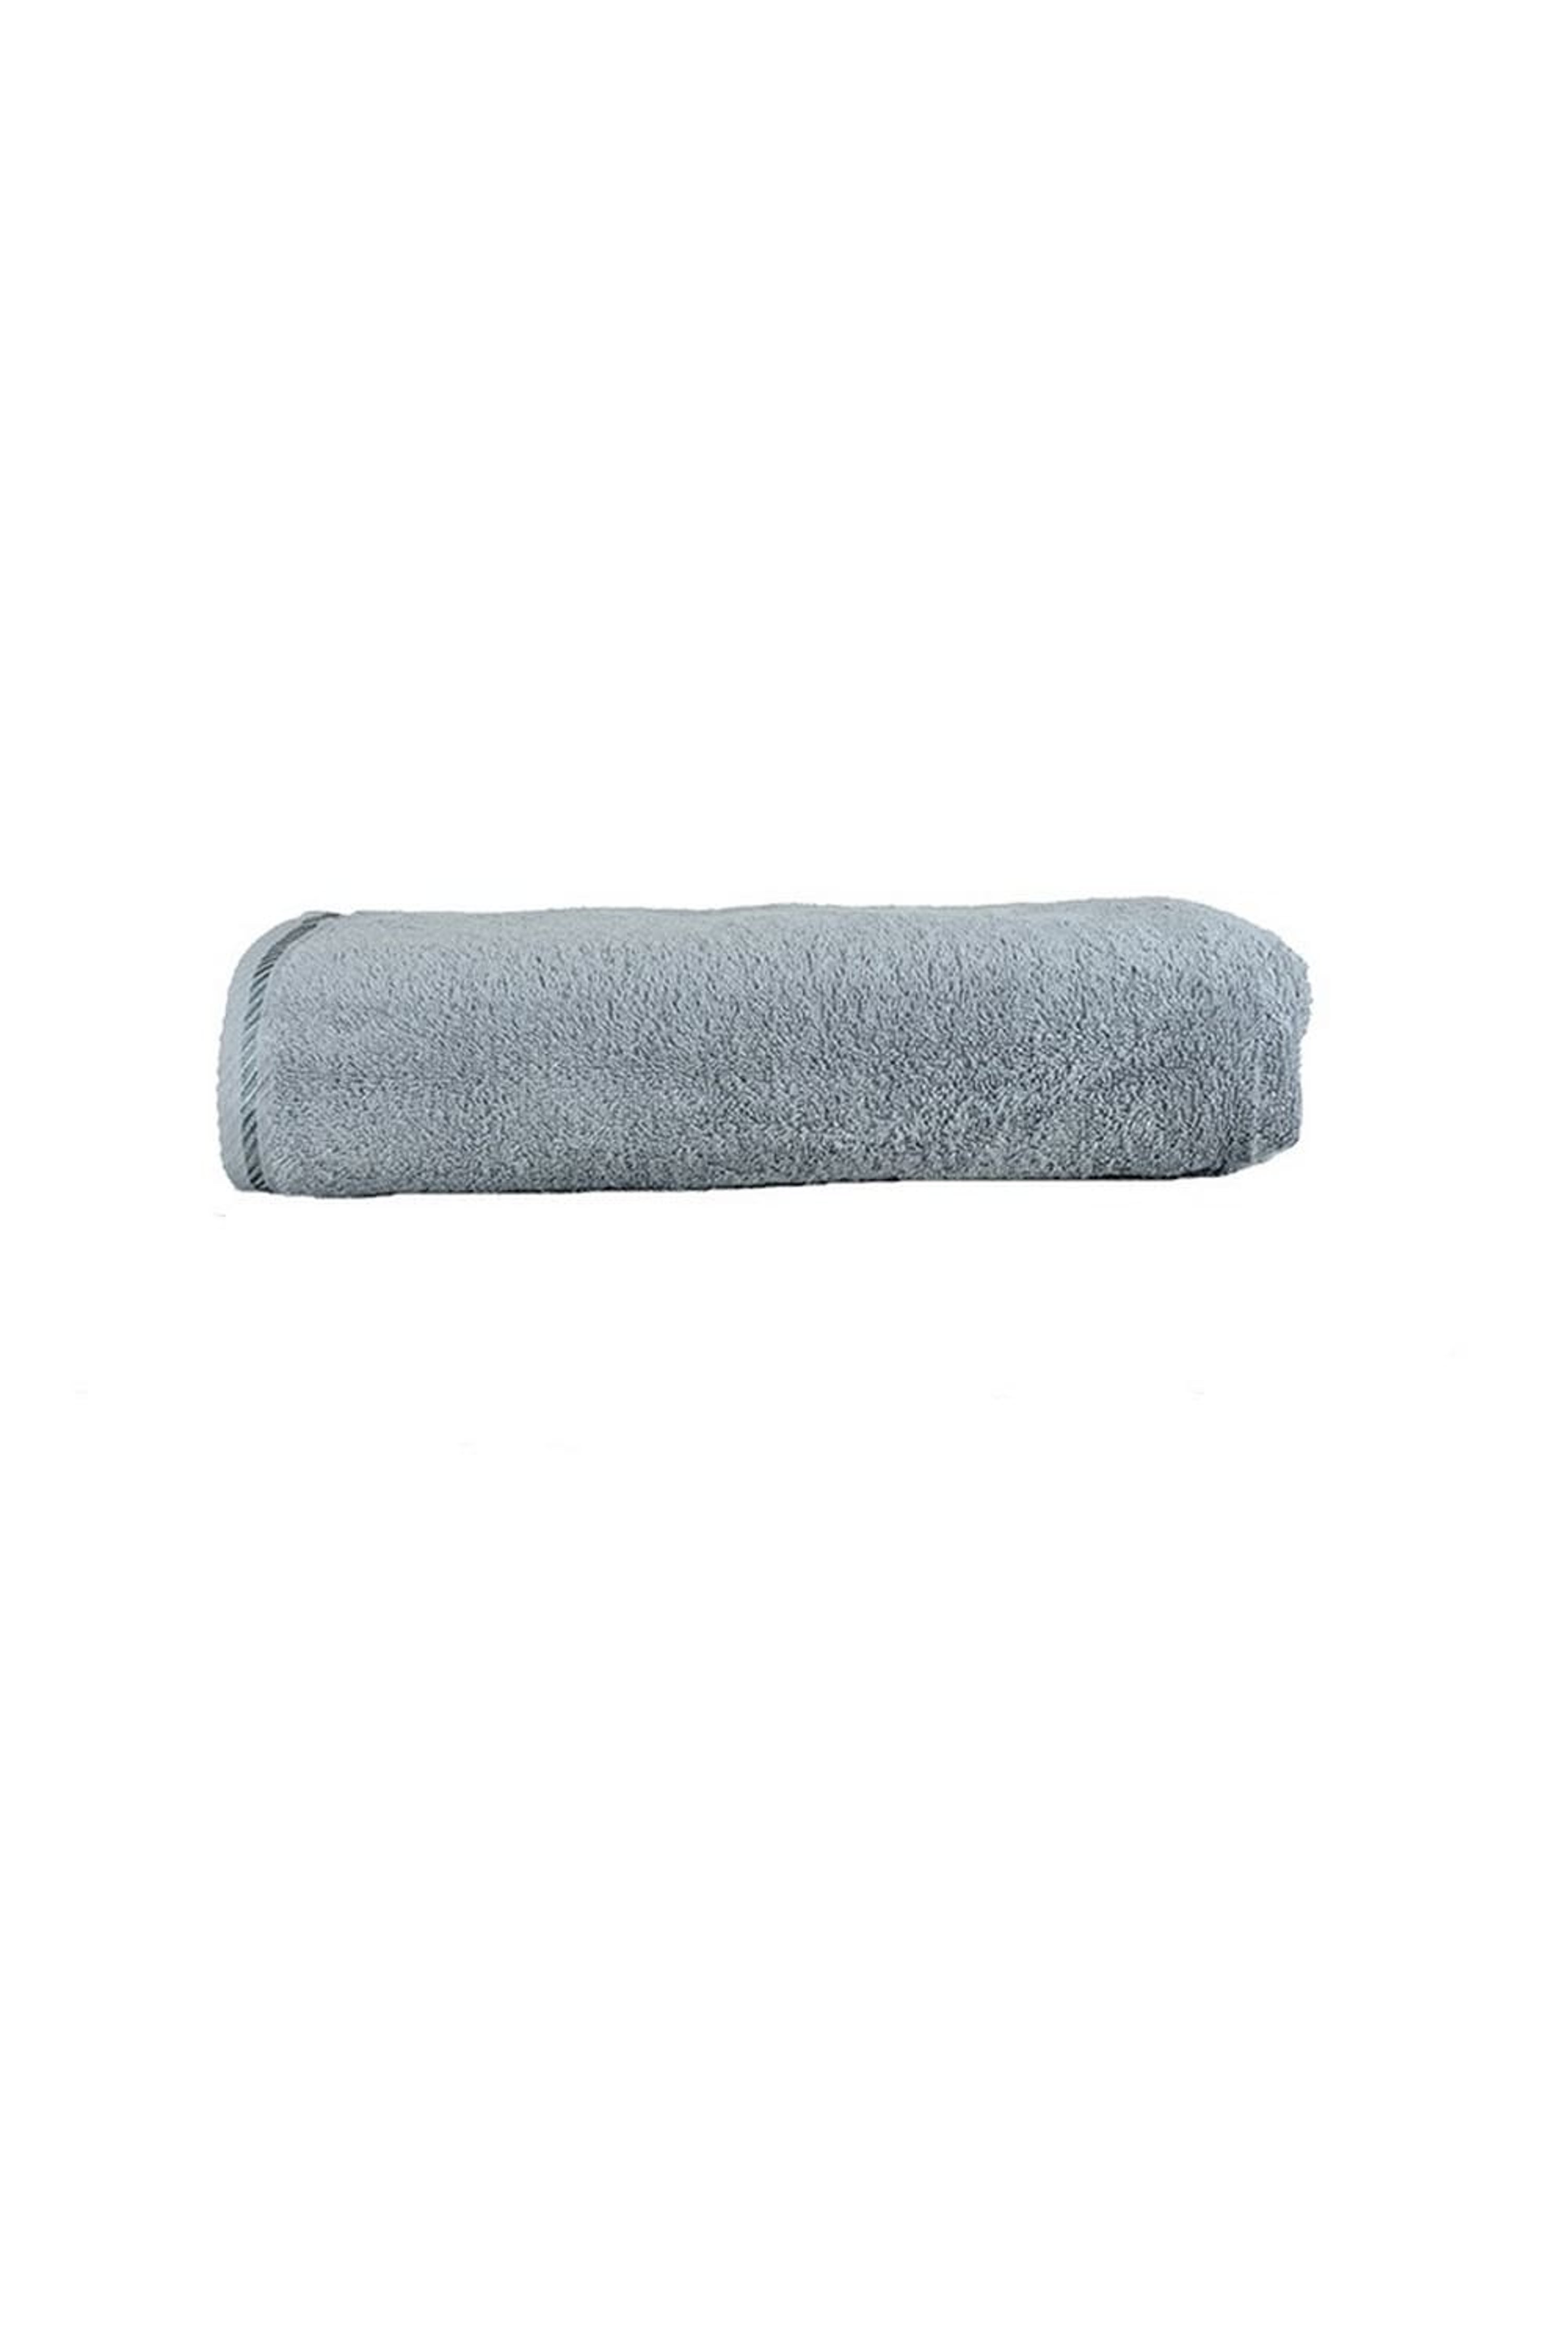 A&R TOWELS A&R TOWELS A&R TOWELS ULTRA SOFT BATH TOWEL (ANTHRACITE GRAY) (ONE SIZE)